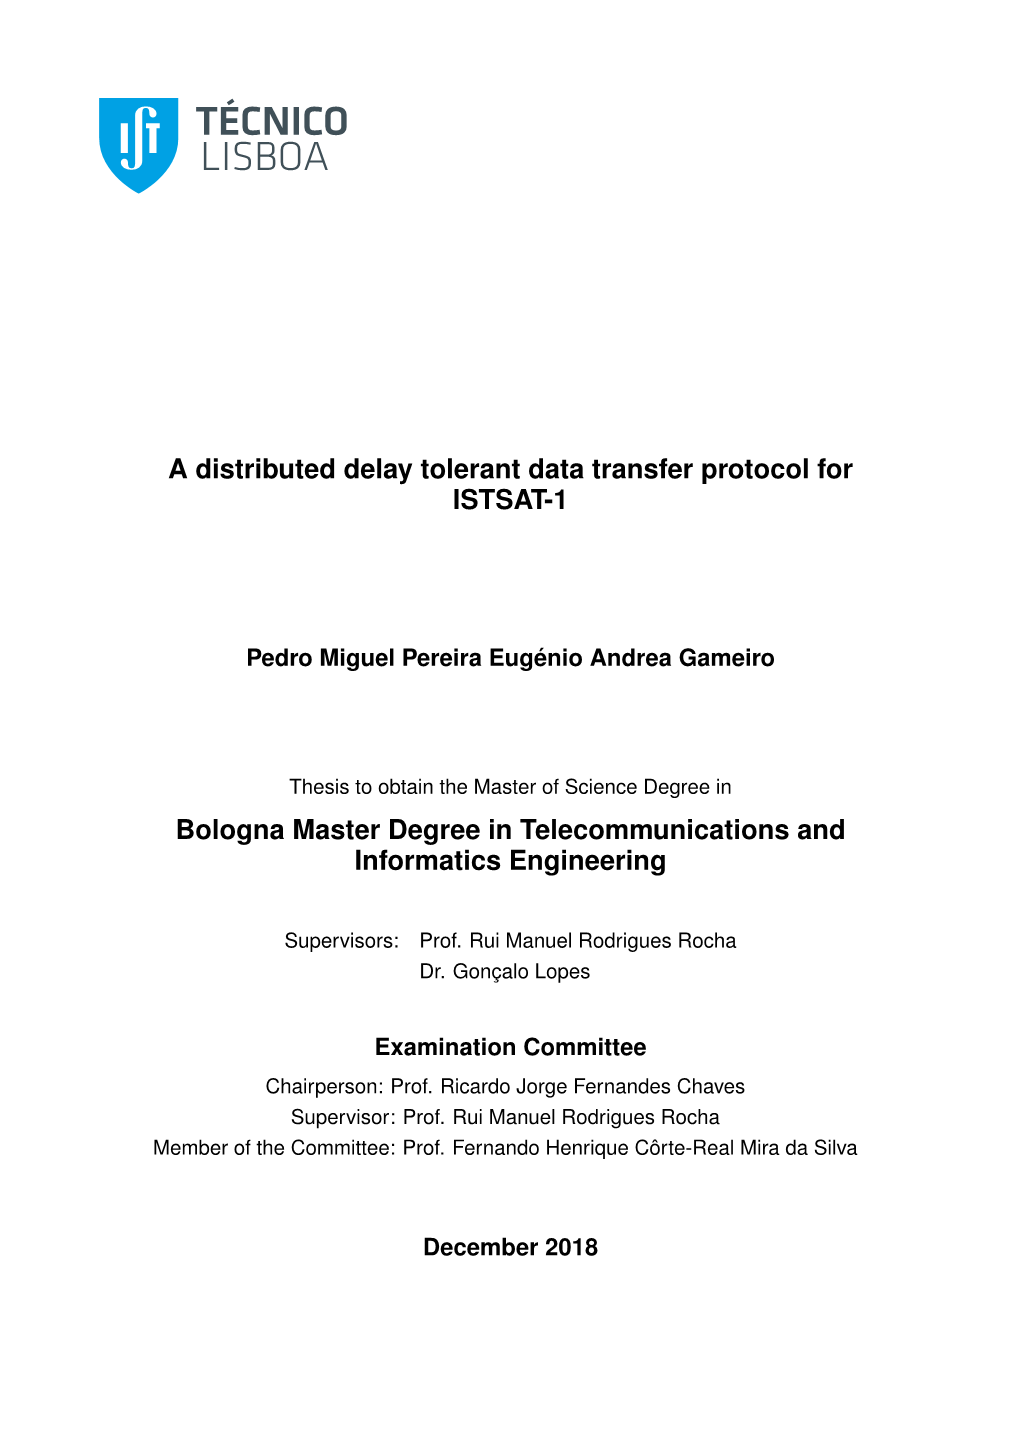 A Distributed Delay Tolerant Data Transfer Protocol for ISTSAT-1